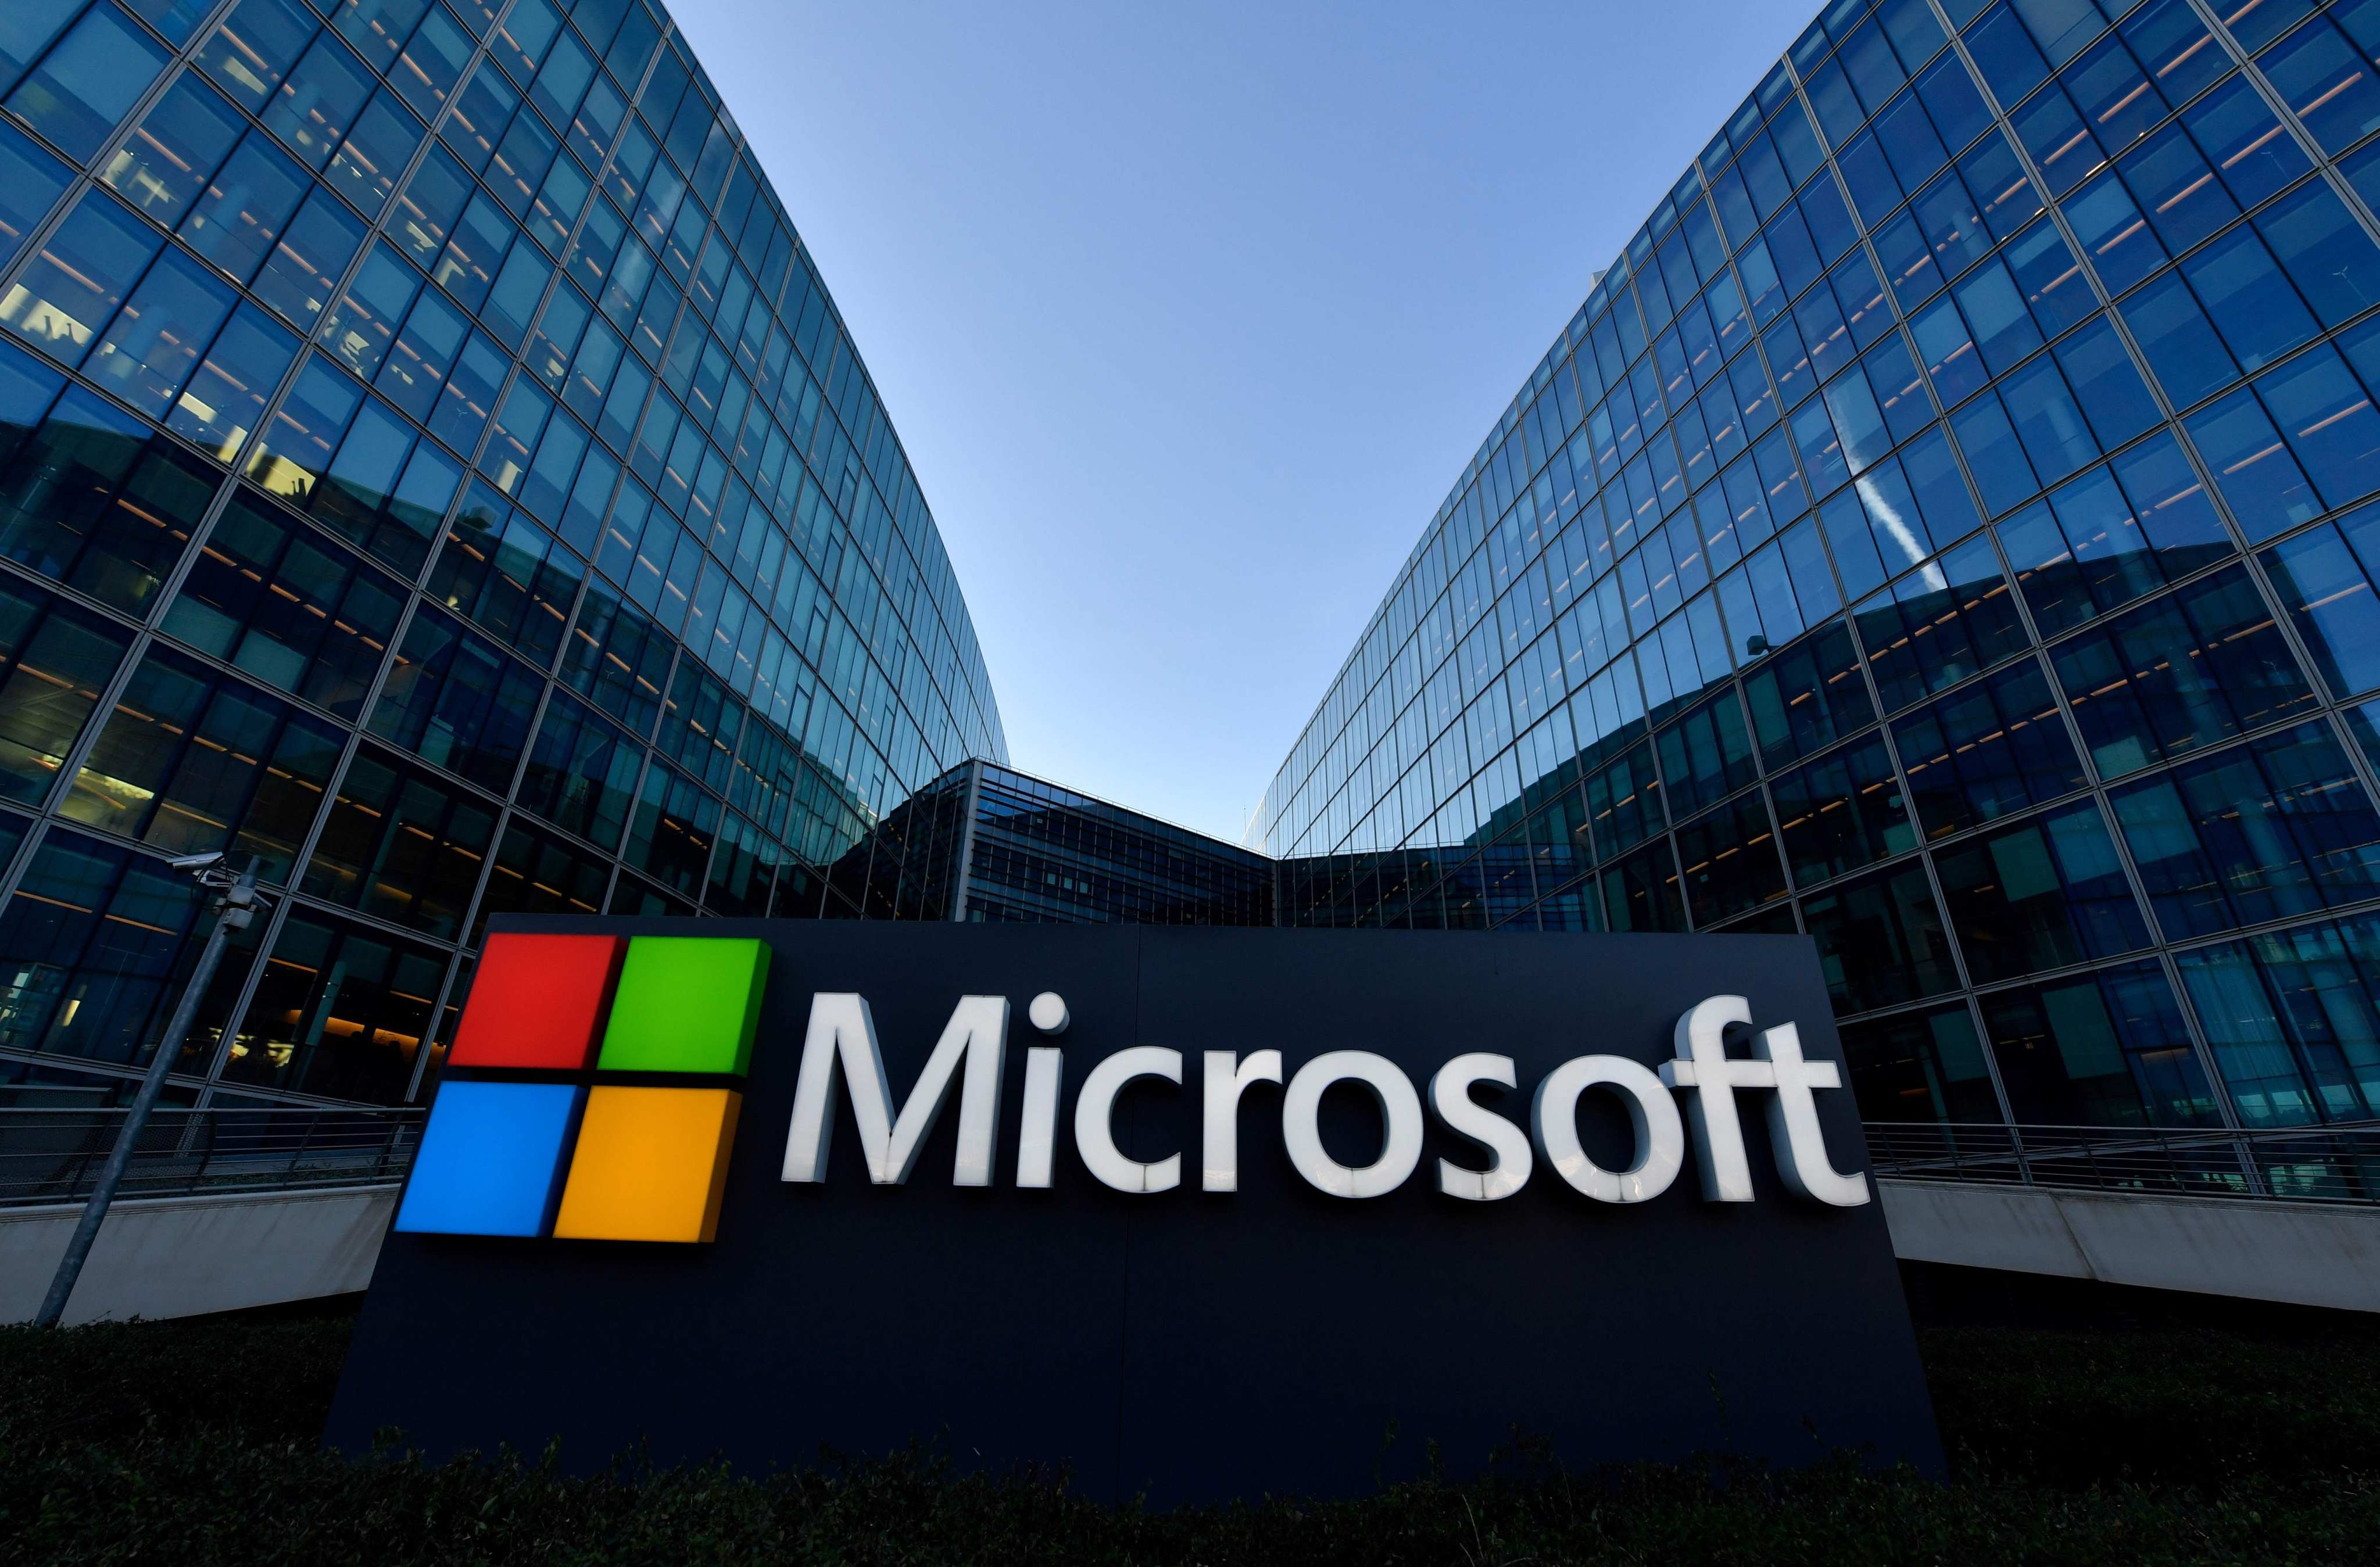 Microsoft Hong Kong says it will continue offer its AI services to eligible customers in the city. Photo: AFP